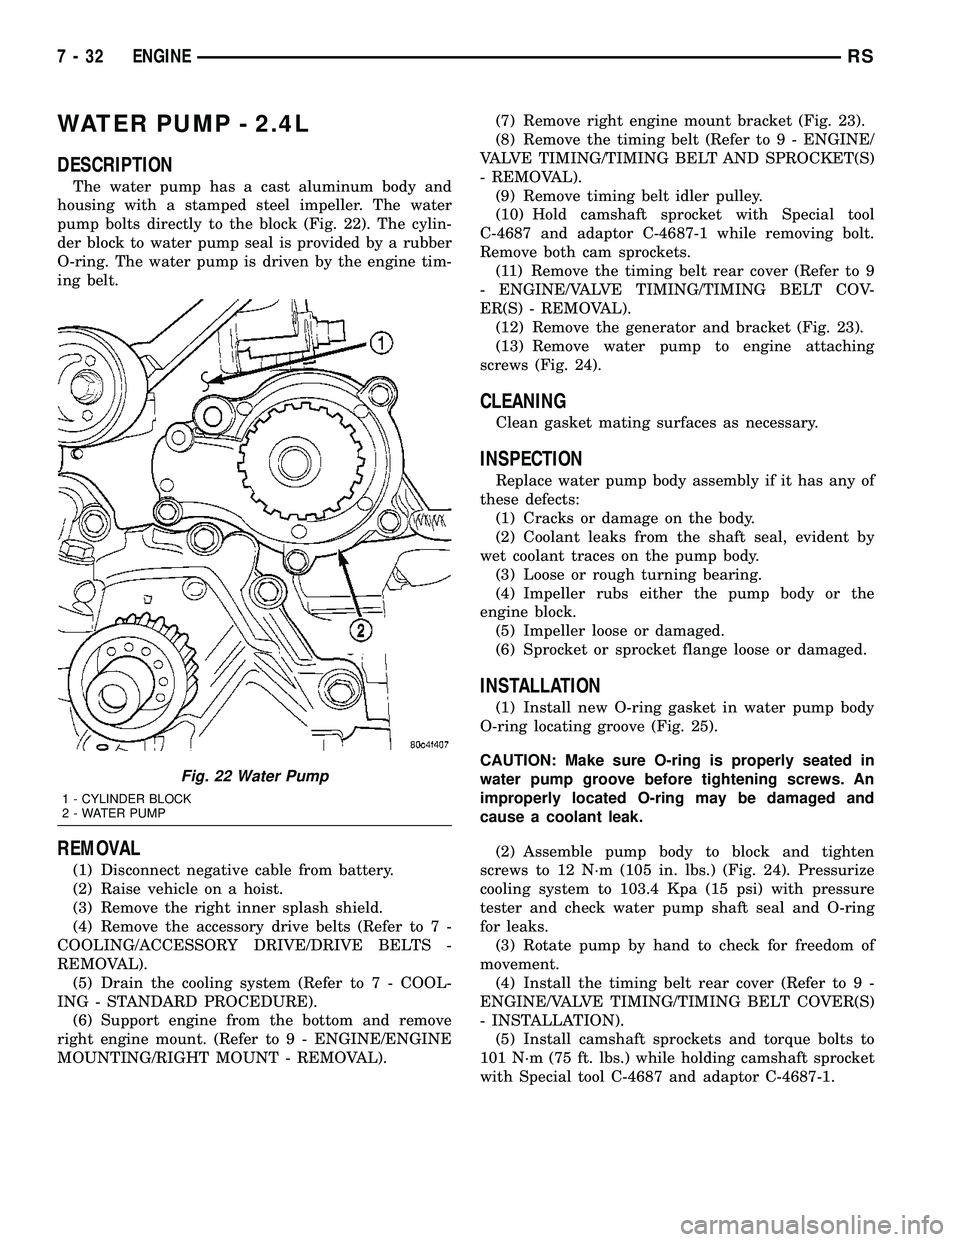 CHRYSLER CARAVAN 2005  Service Manual WATER PUMP - 2.4L
DESCRIPTION
The water pump has a cast aluminum body and
housing with a stamped steel impeller. The water
pump bolts directly to the block (Fig. 22). The cylin-
der block to water pum